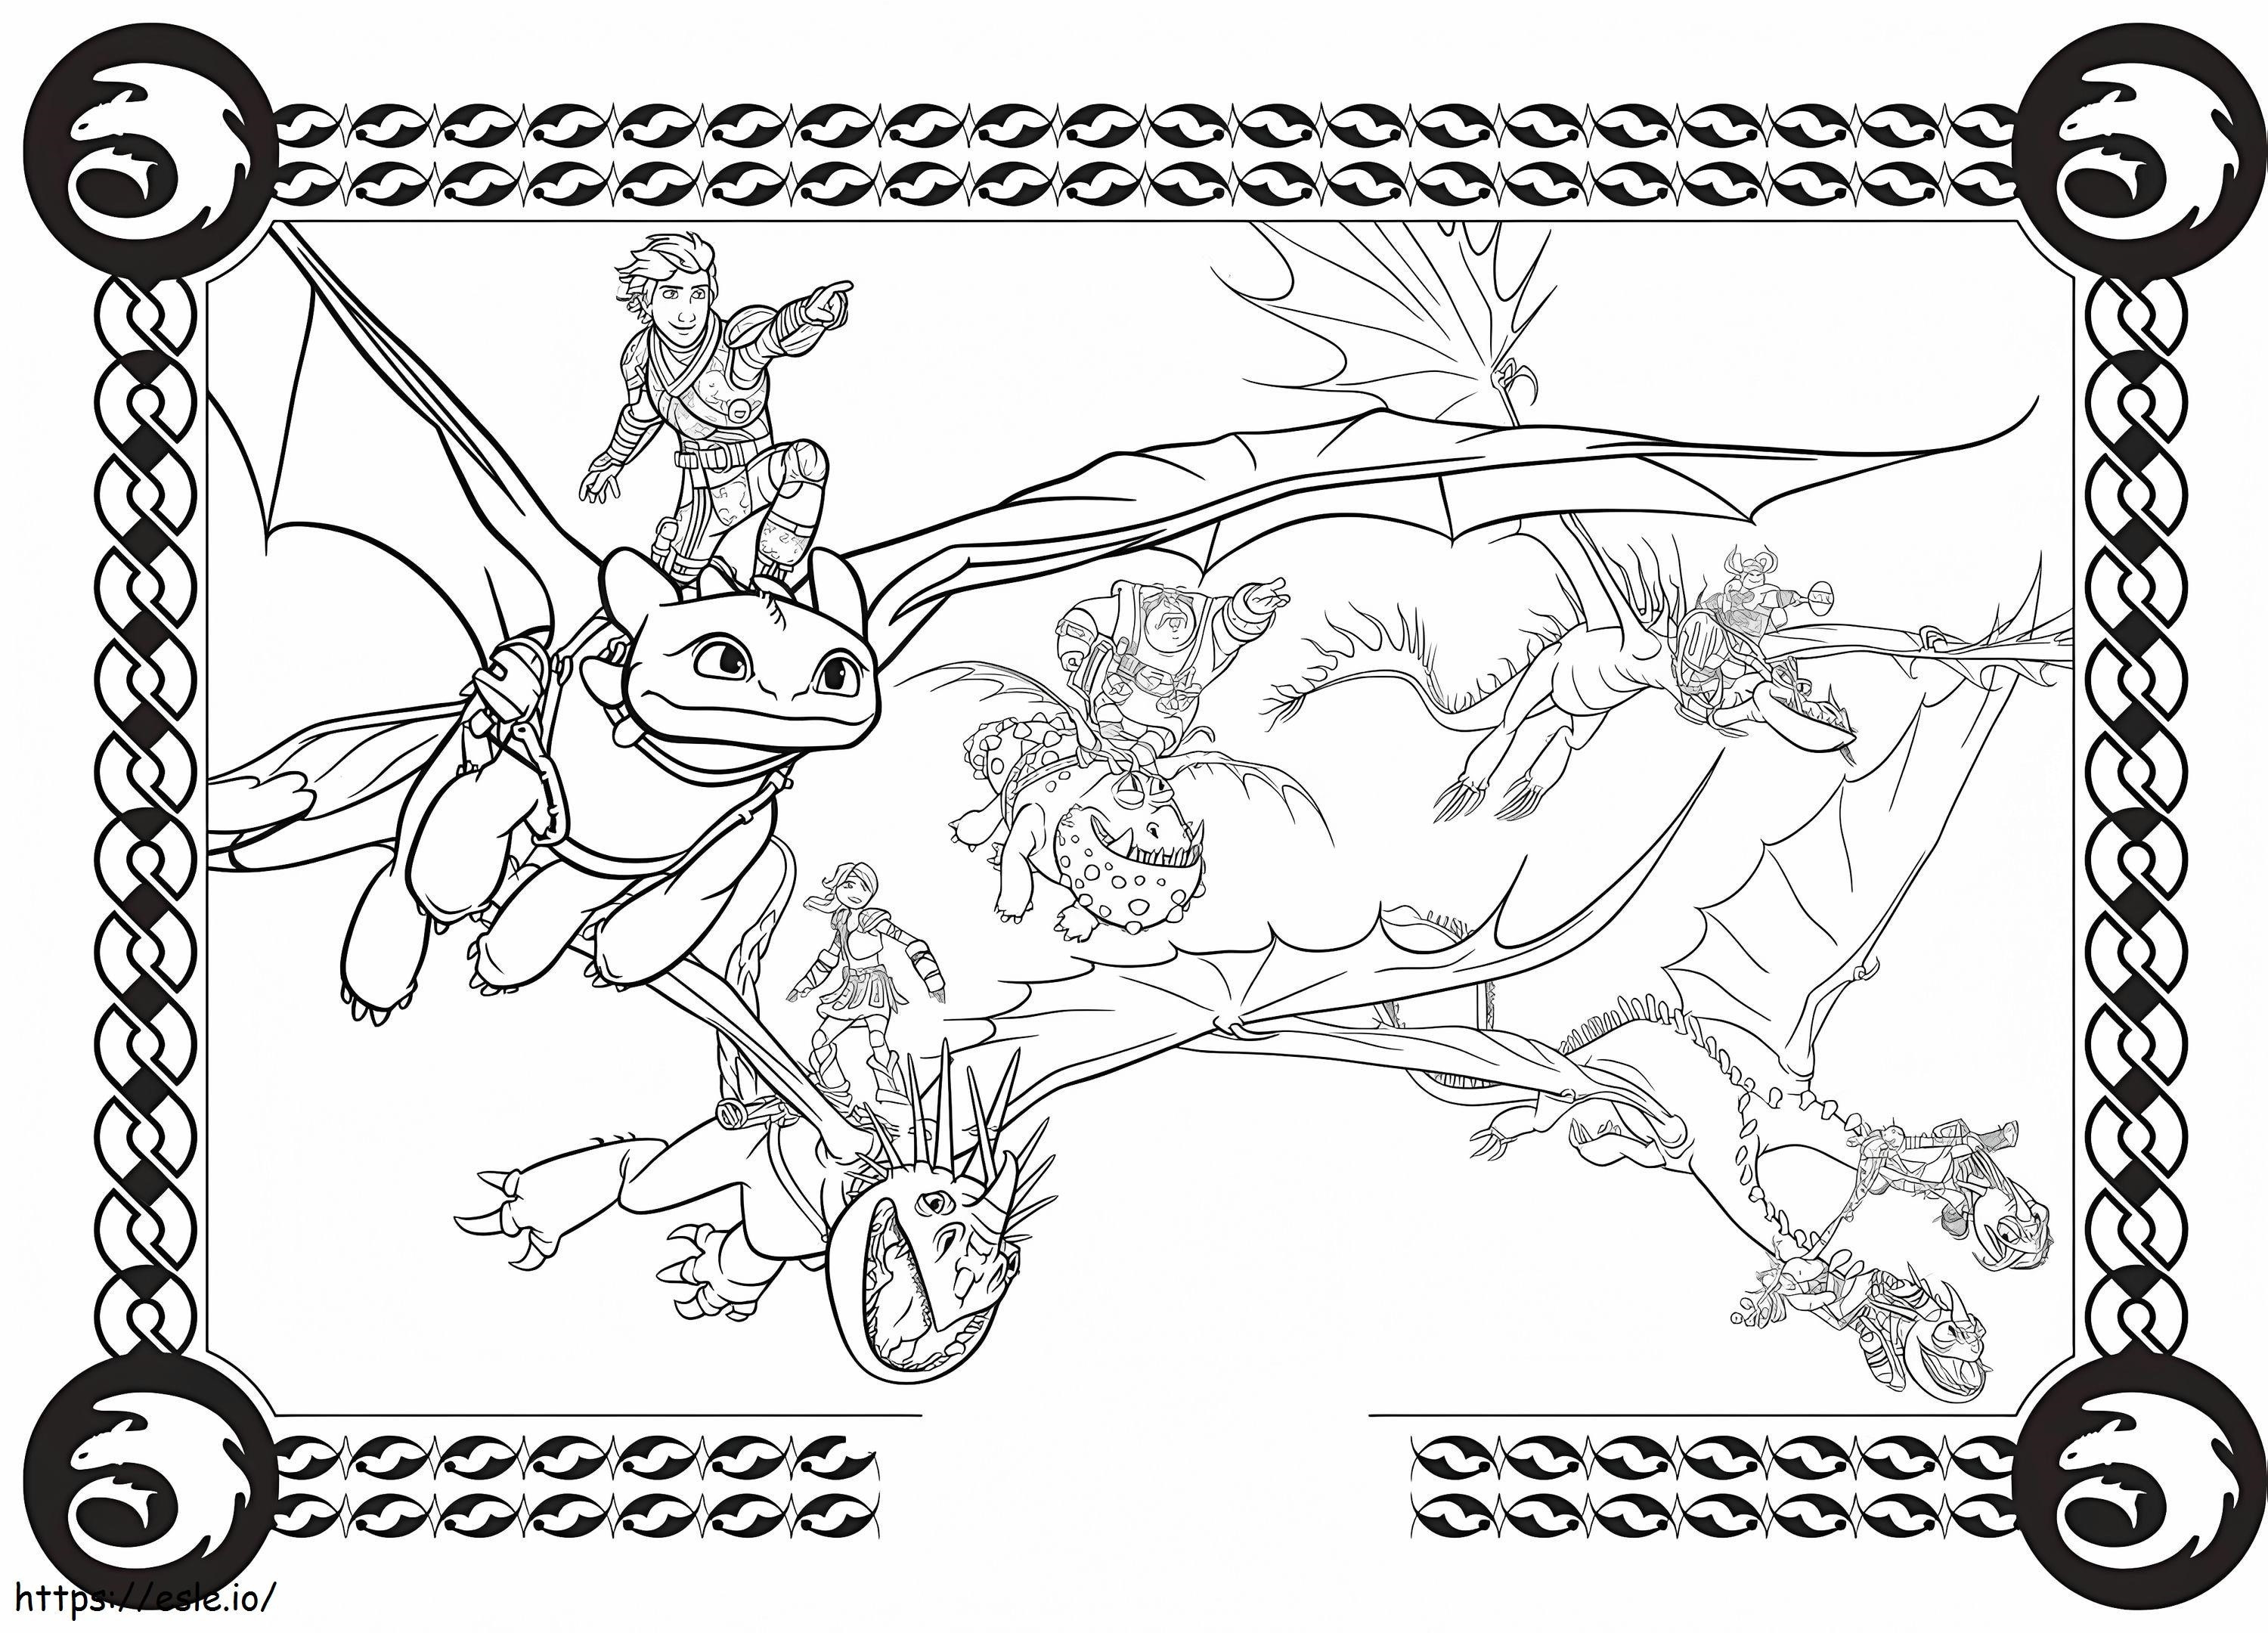 Toothless Hiccup And Friends coloring page